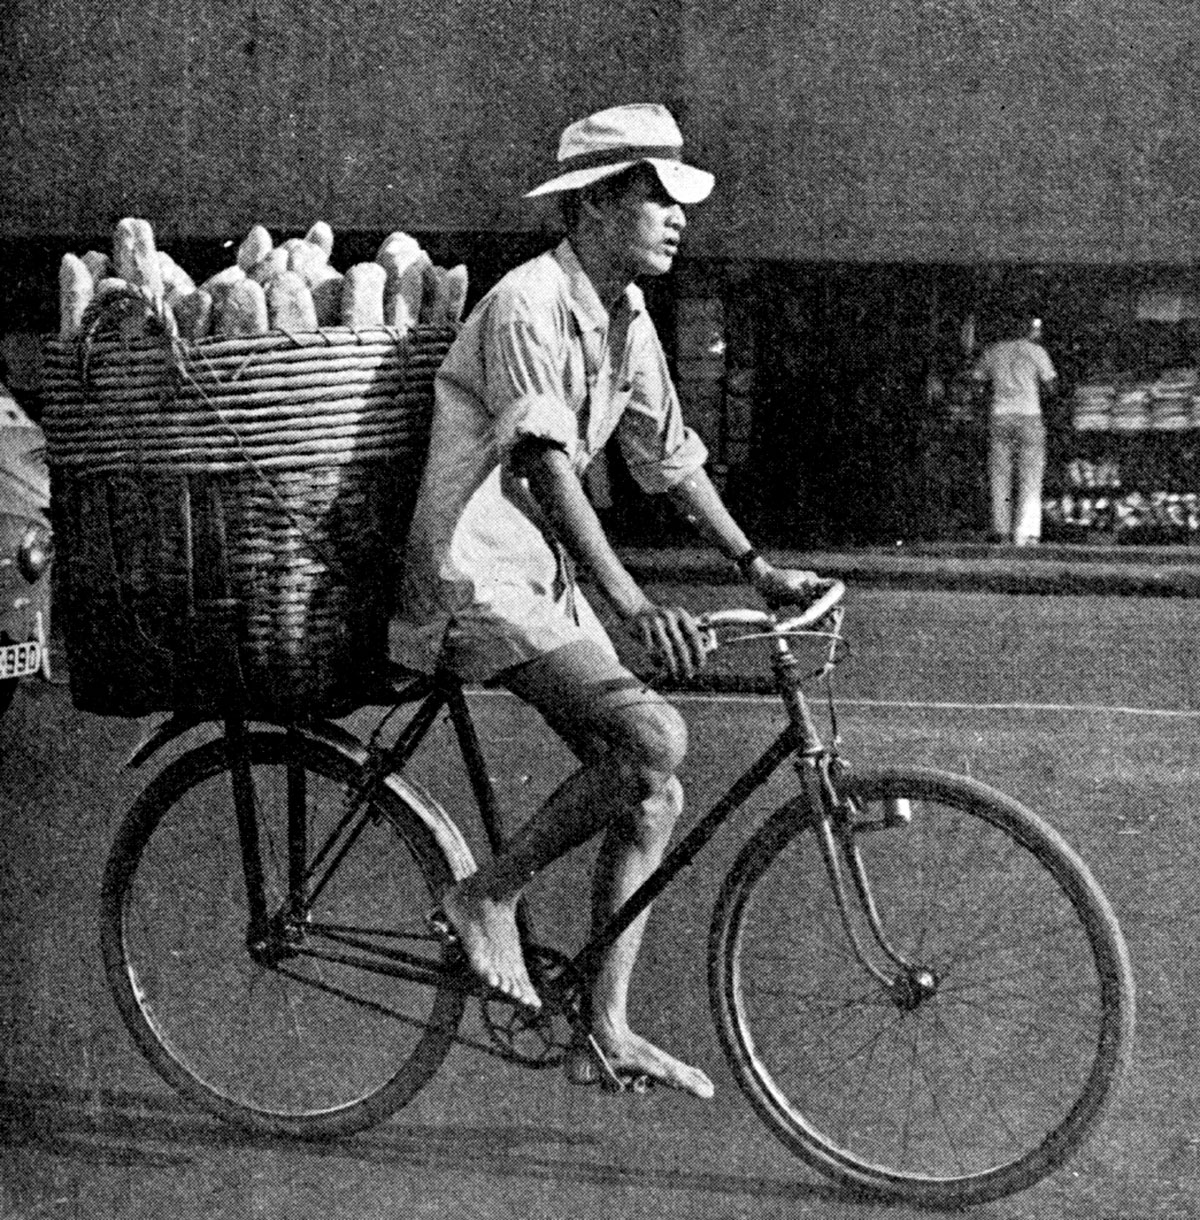 A photo of a man delivering bread on a bicycle. From a 1959 book published by the American Women’s Association of Saigon entitled “Saigon: A Booklet of Helpful Information for American in Vietnam.”